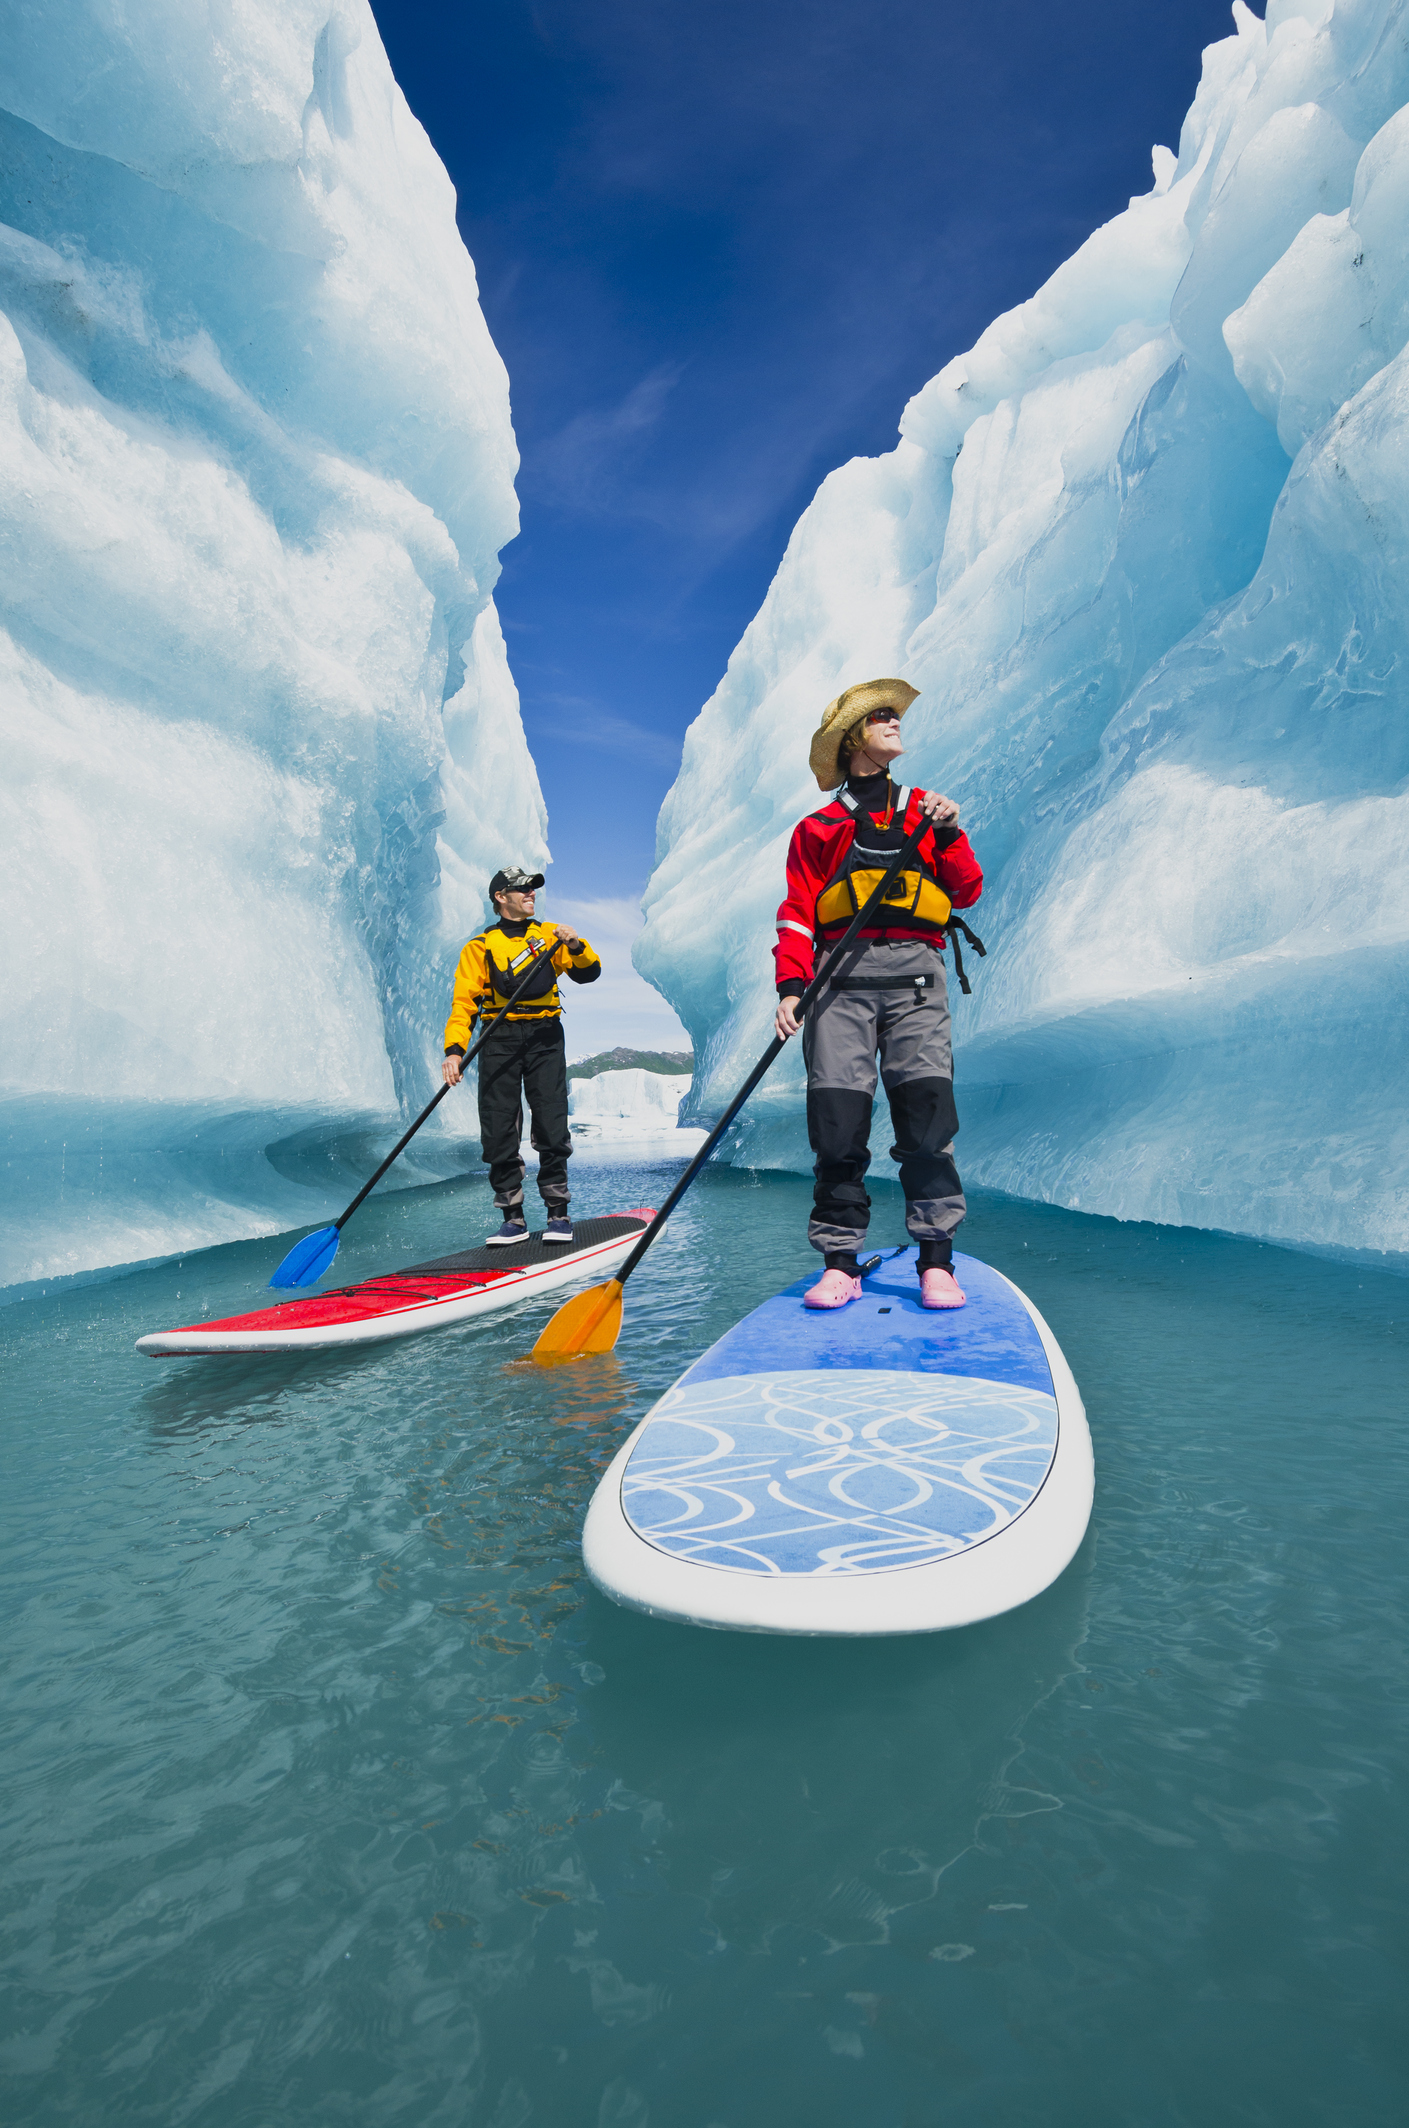 A couple on stand up paddle boards (SUP) explore an iceberg canyon on Bear Lake in Kenai Fjords National Park, Alaska.